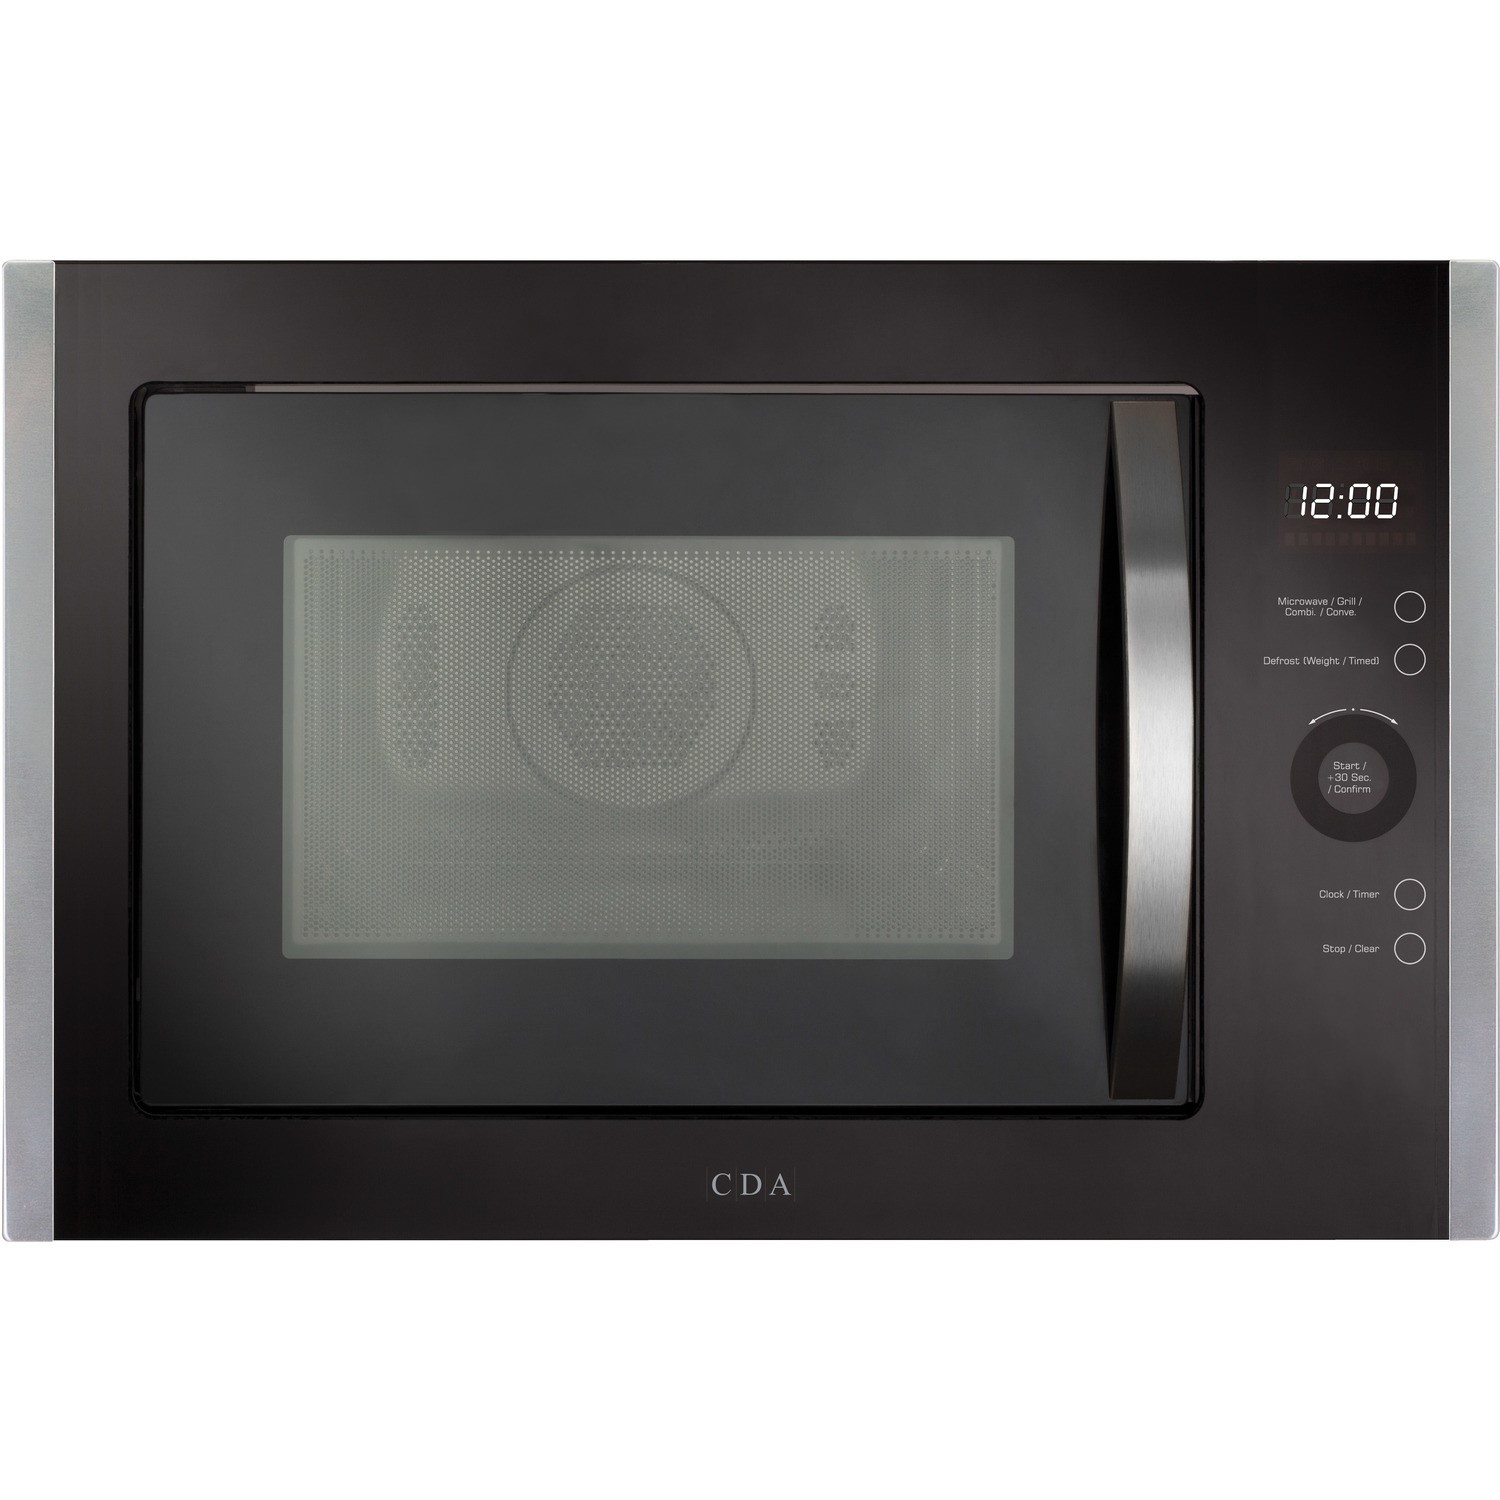 CDA 25L 900W Built-in Combination Microwave - Stainless Steel